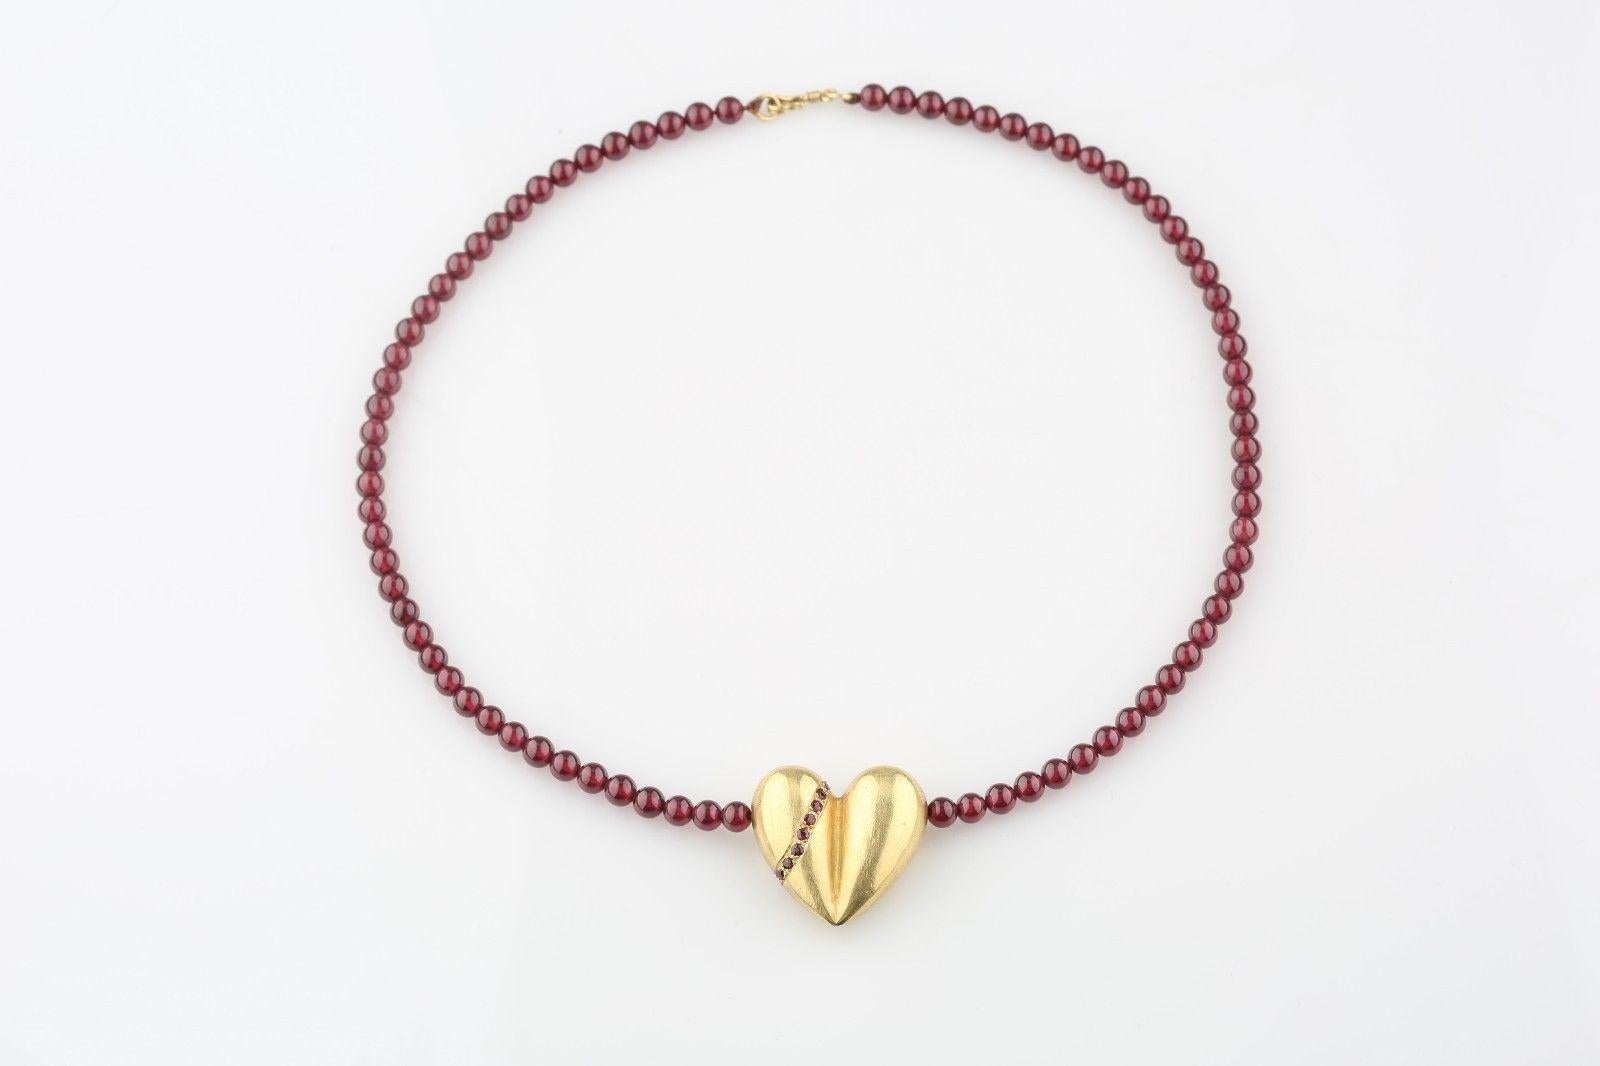 Kieselstein-Cord 18k gold heart pendant
9 rubies appear on one side of the heart, 8 sapphires appear on the opposite
Garnet bead strand necklace with a gold hook and loop
This item is no longer being manufactured, expected production date is late